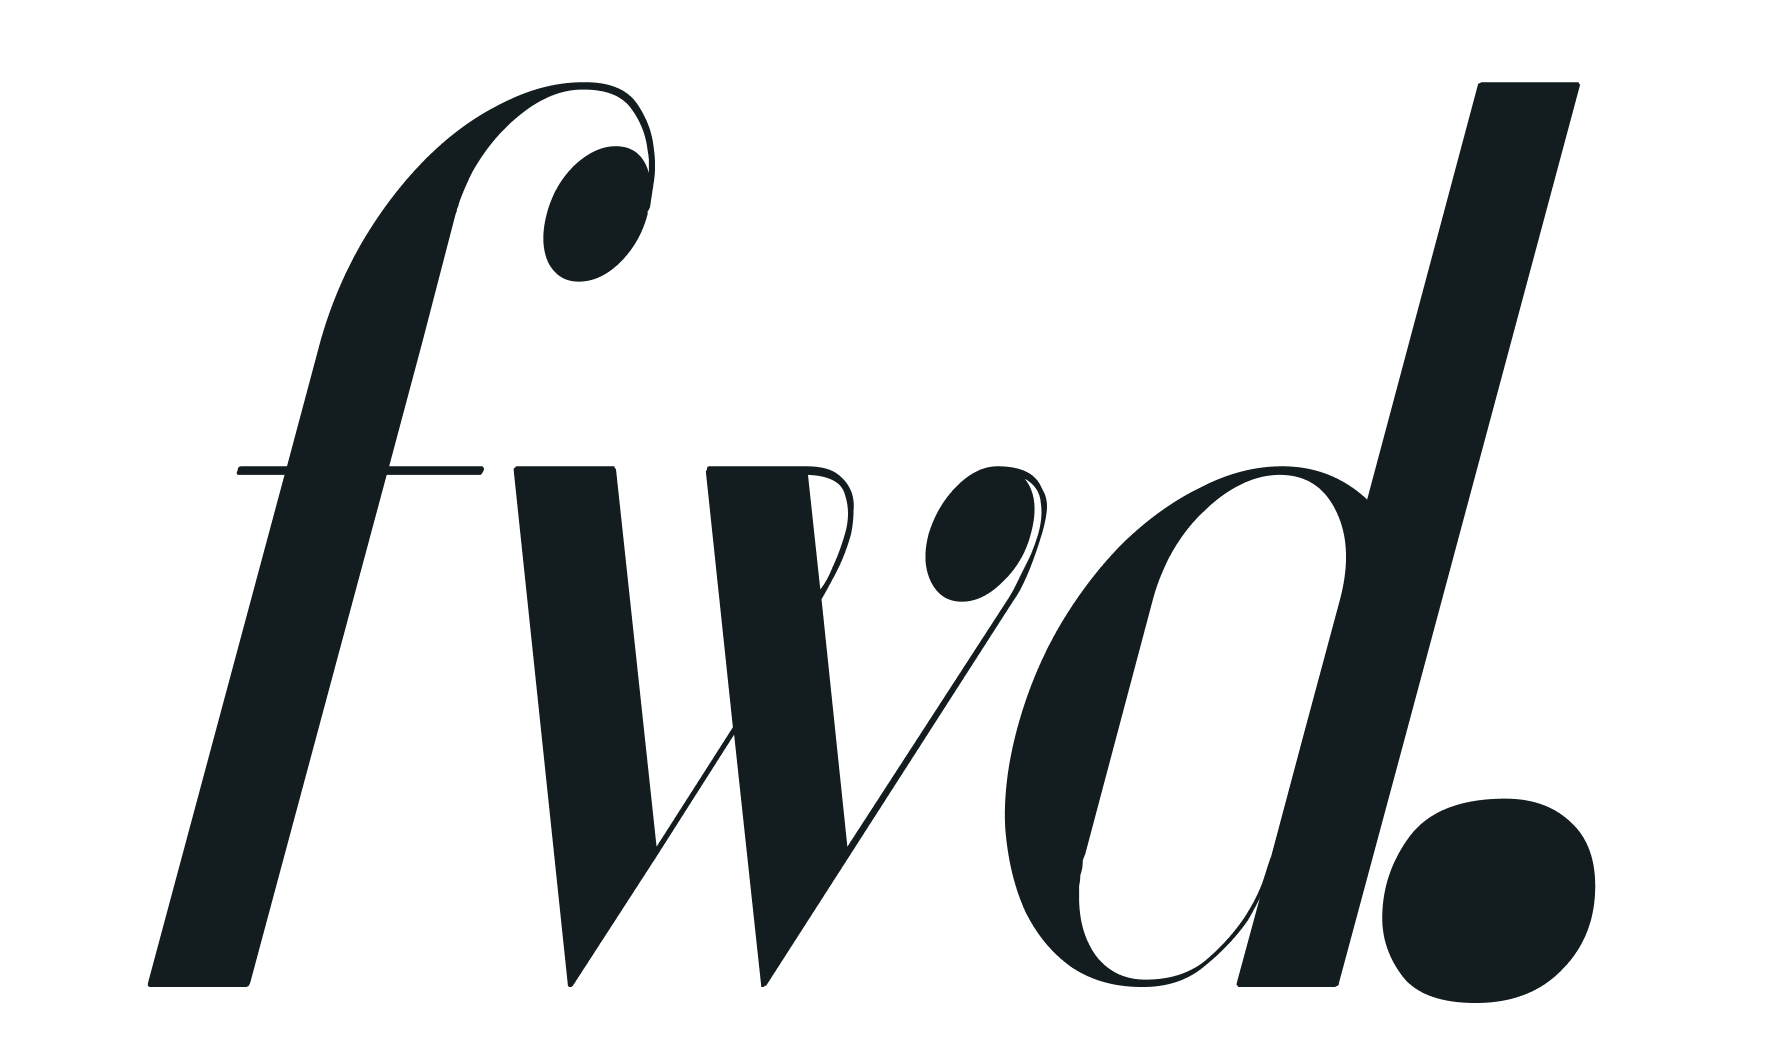 fwd_logo_small_black_transparent background.png